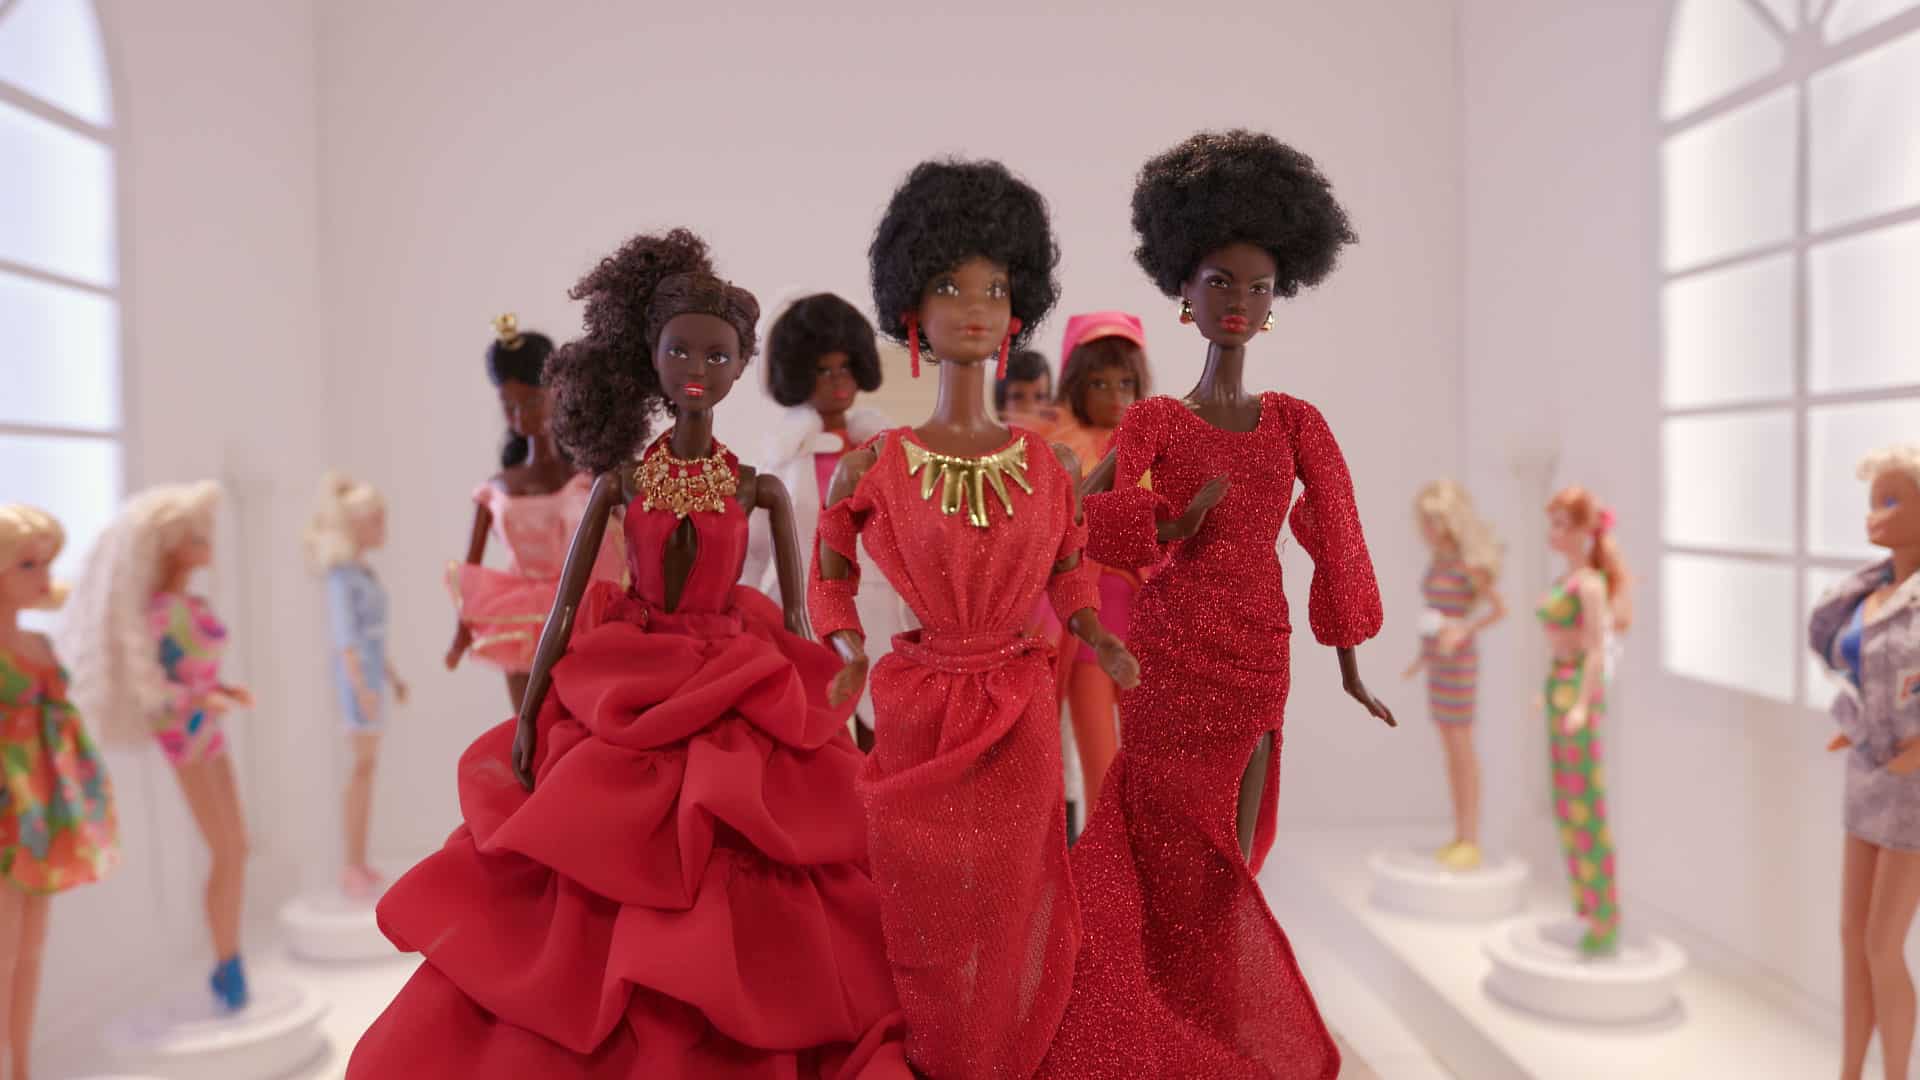 Black Barbies: Walkingt through a gallery, surrounded by the other Barbies that have appeared throughout the history of Mattel